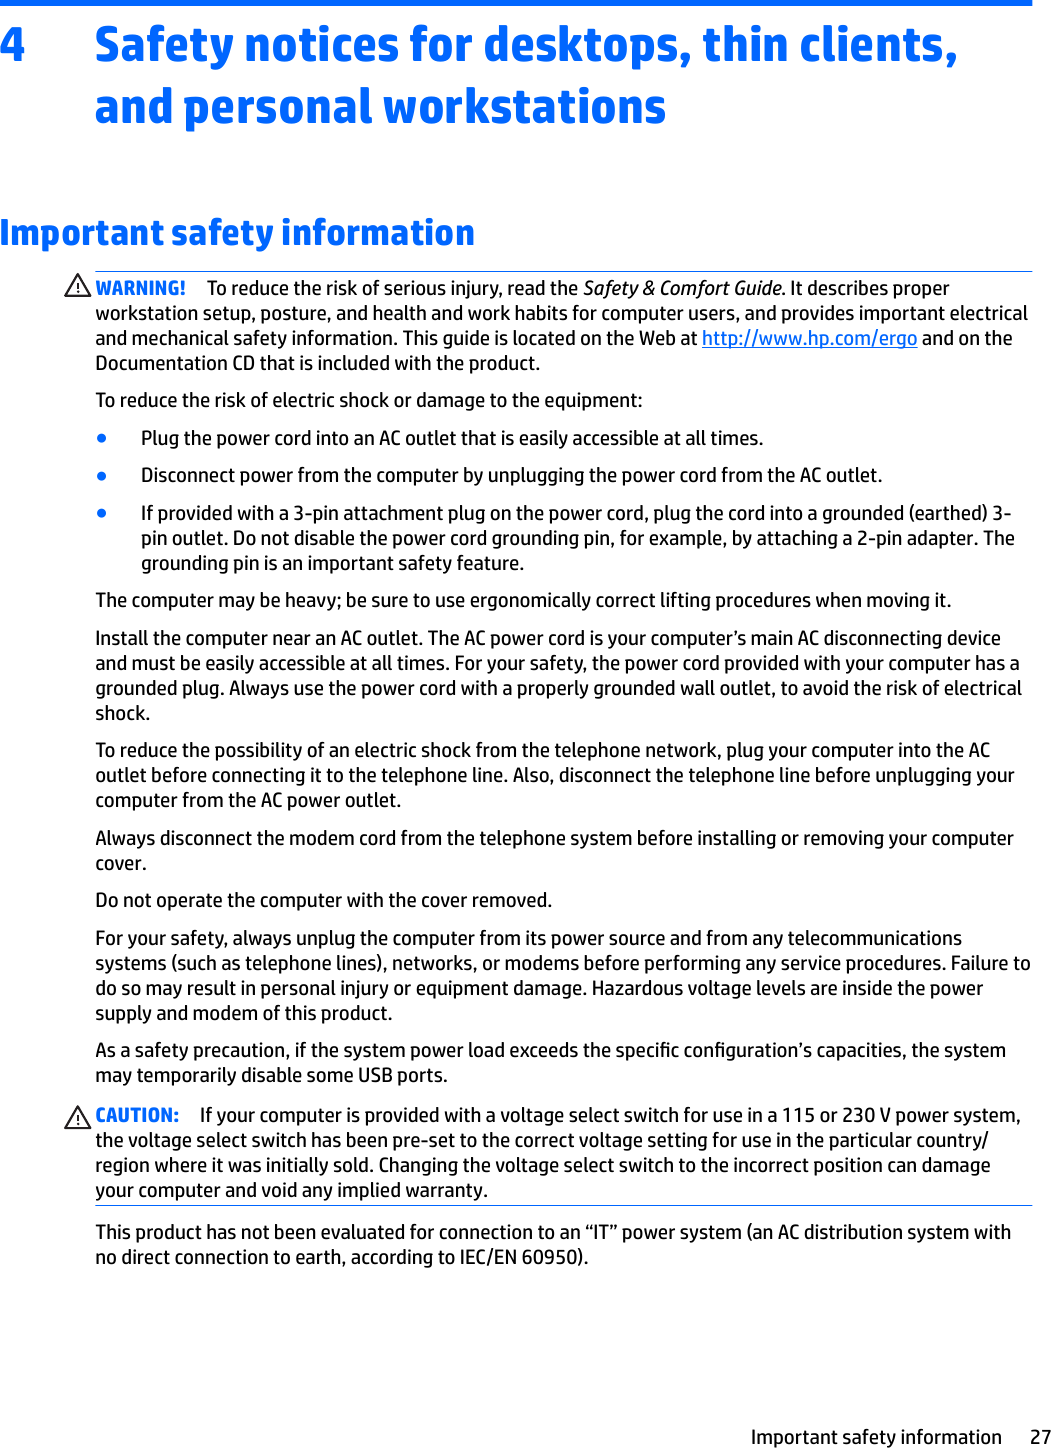 4 Safety notices for desktops, thin clients, and personal workstationsImportant safety informationWARNING! To reduce the risk of serious injury, read the Safety &amp; Comfort Guide. It describes proper workstation setup, posture, and health and work habits for computer users, and provides important electrical and mechanical safety information. This guide is located on the Web at http://www.hp.com/ergo and on the Documentation CD that is included with the product.To reduce the risk of electric shock or damage to the equipment:●Plug the power cord into an AC outlet that is easily accessible at all times.●Disconnect power from the computer by unplugging the power cord from the AC outlet.●If provided with a 3-pin attachment plug on the power cord, plug the cord into a grounded (earthed) 3-pin outlet. Do not disable the power cord grounding pin, for example, by attaching a 2-pin adapter. The grounding pin is an important safety feature.The computer may be heavy; be sure to use ergonomically correct lifting procedures when moving it.Install the computer near an AC outlet. The AC power cord is your computer’s main AC disconnecting device and must be easily accessible at all times. For your safety, the power cord provided with your computer has a grounded plug. Always use the power cord with a properly grounded wall outlet, to avoid the risk of electrical shock.To reduce the possibility of an electric shock from the telephone network, plug your computer into the AC outlet before connecting it to the telephone line. Also, disconnect the telephone line before unplugging your computer from the AC power outlet.Always disconnect the modem cord from the telephone system before installing or removing your computer cover.Do not operate the computer with the cover removed.For your safety, always unplug the computer from its power source and from any telecommunications systems (such as telephone lines), networks, or modems before performing any service procedures. Failure to do so may result in personal injury or equipment damage. Hazardous voltage levels are inside the power supply and modem of this product.As a safety precaution, if the system power load exceeds the specic conguration’s capacities, the system may temporarily disable some USB ports.CAUTION: If your computer is provided with a voltage select switch for use in a 115 or 230 V power system, the voltage select switch has been pre-set to the correct voltage setting for use in the particular country/region where it was initially sold. Changing the voltage select switch to the incorrect position can damage your computer and void any implied warranty.This product has not been evaluated for connection to an “IT” power system (an AC distribution system with no direct connection to earth, according to IEC/EN 60950).Important safety information 27